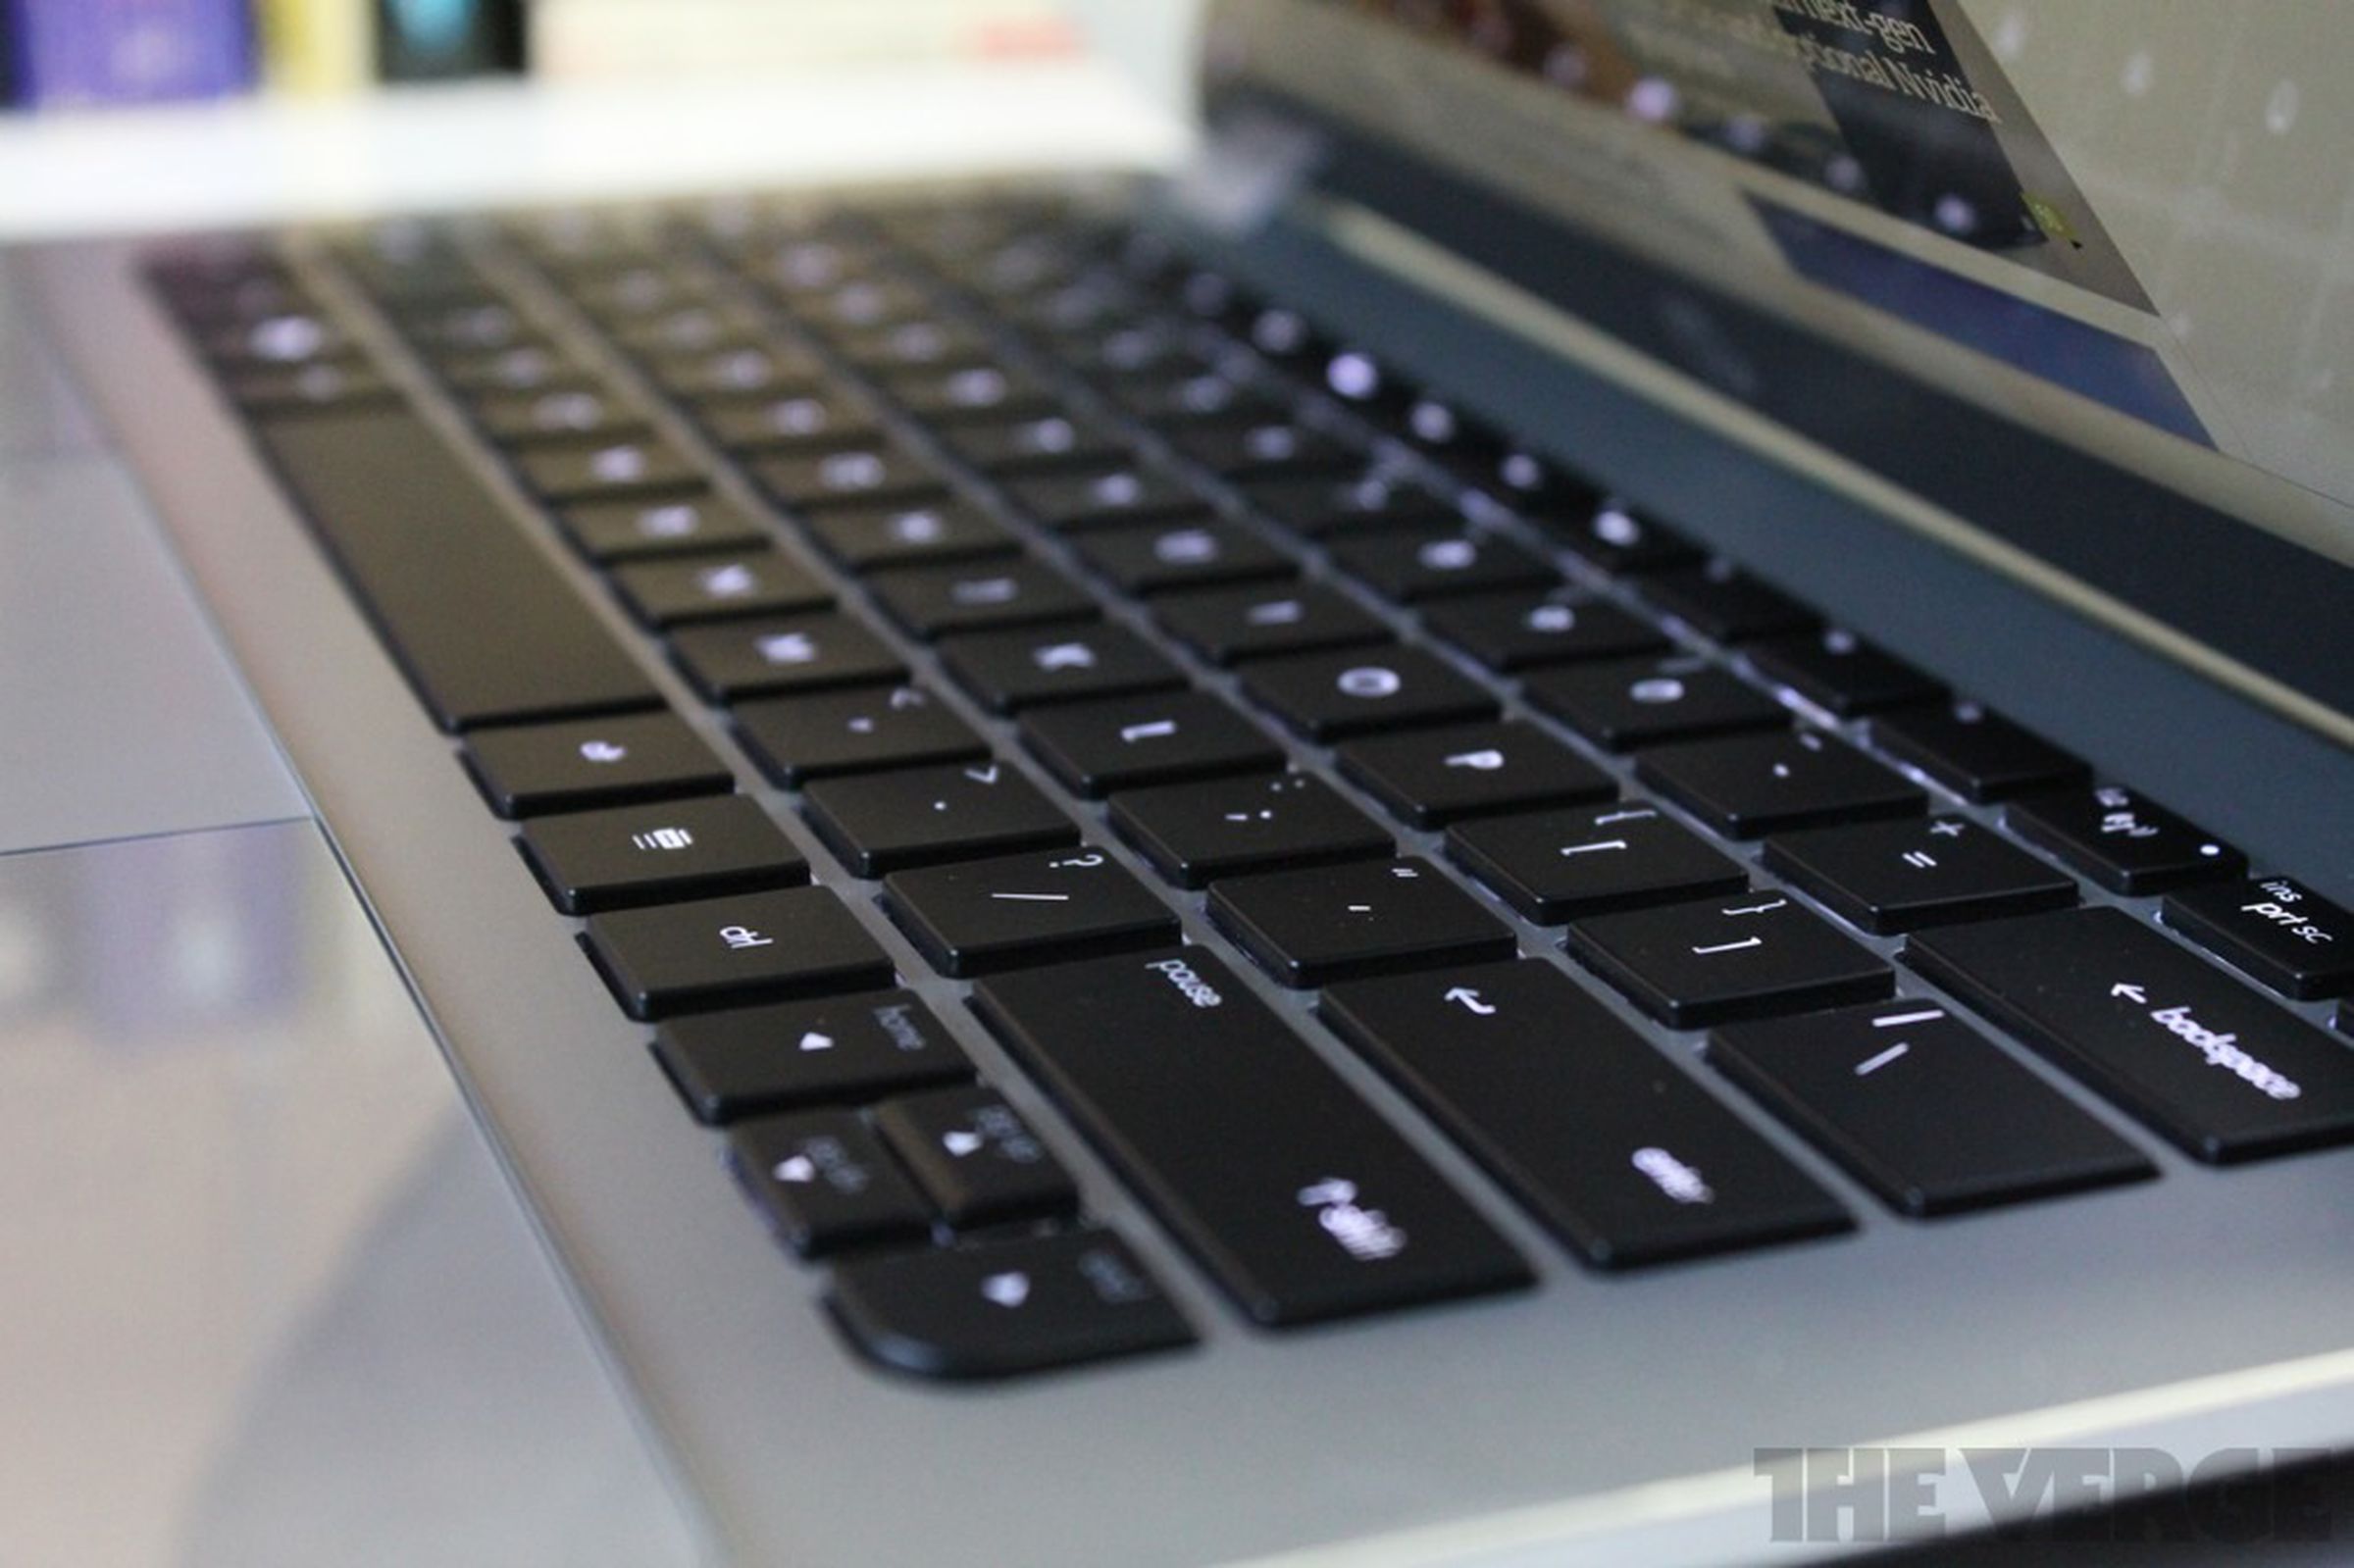 HP Envy 14 Spectre hands-on pictures 